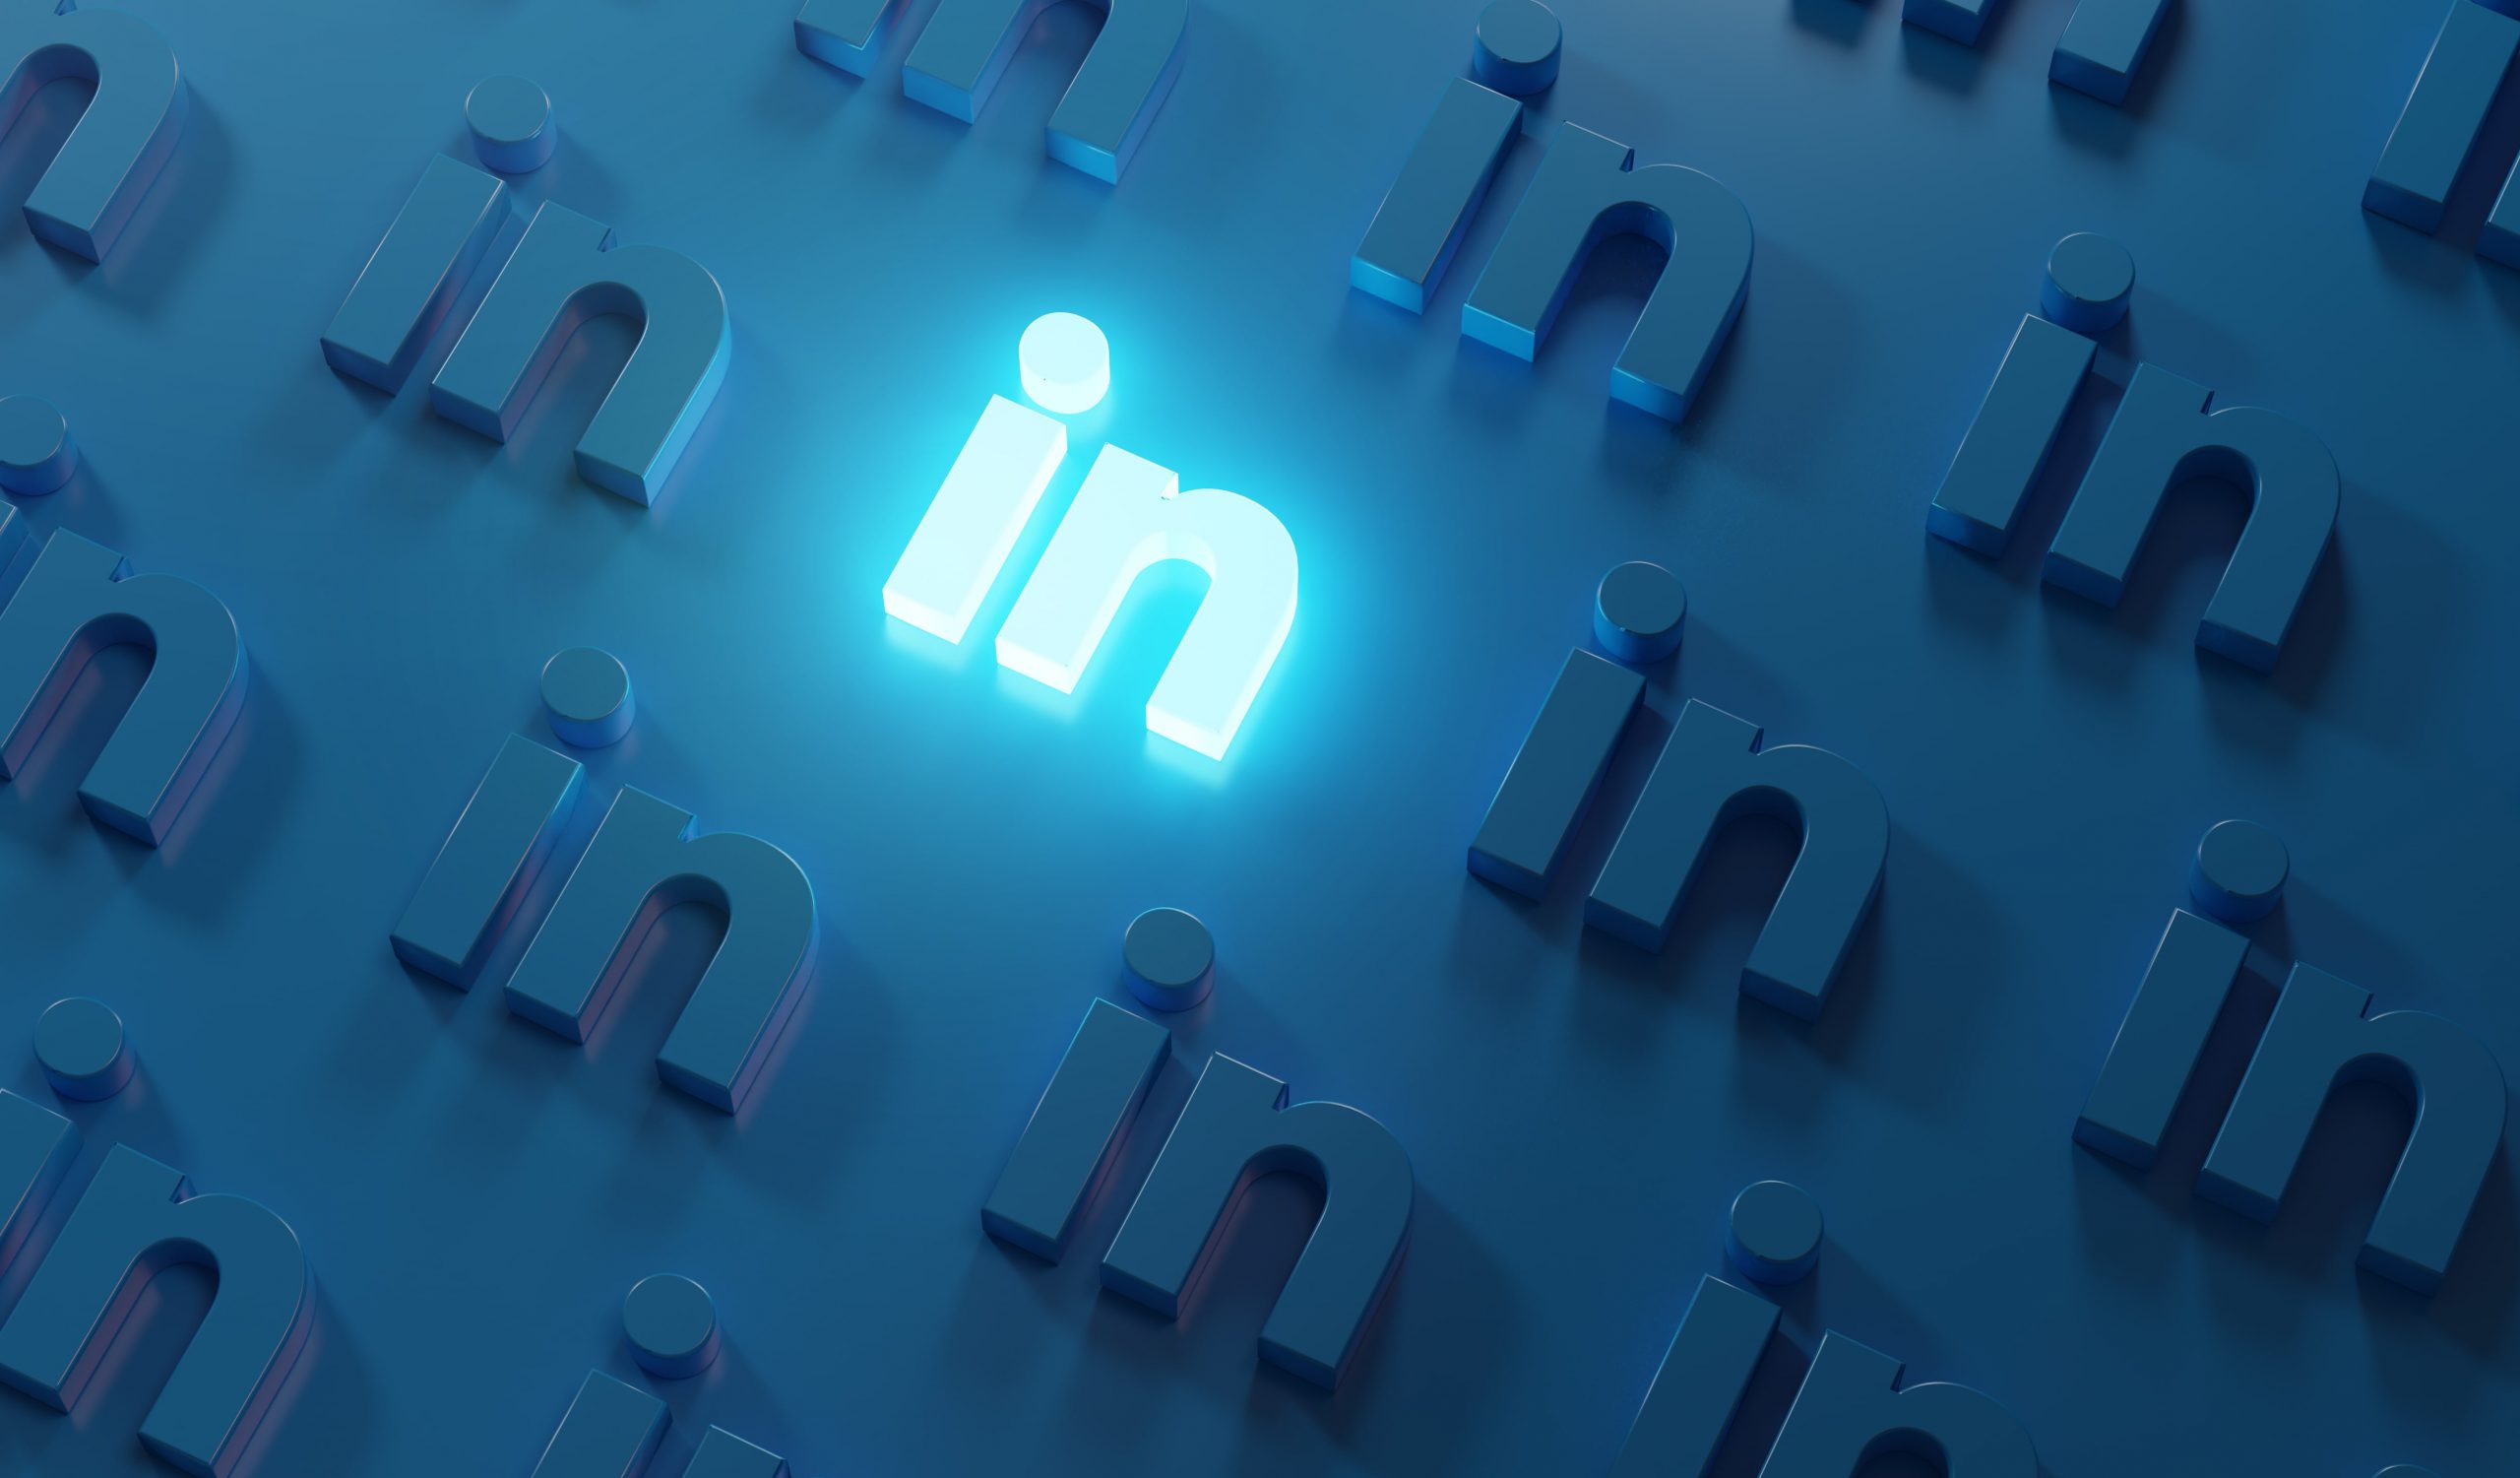 Significant LinkedIn features you should know about